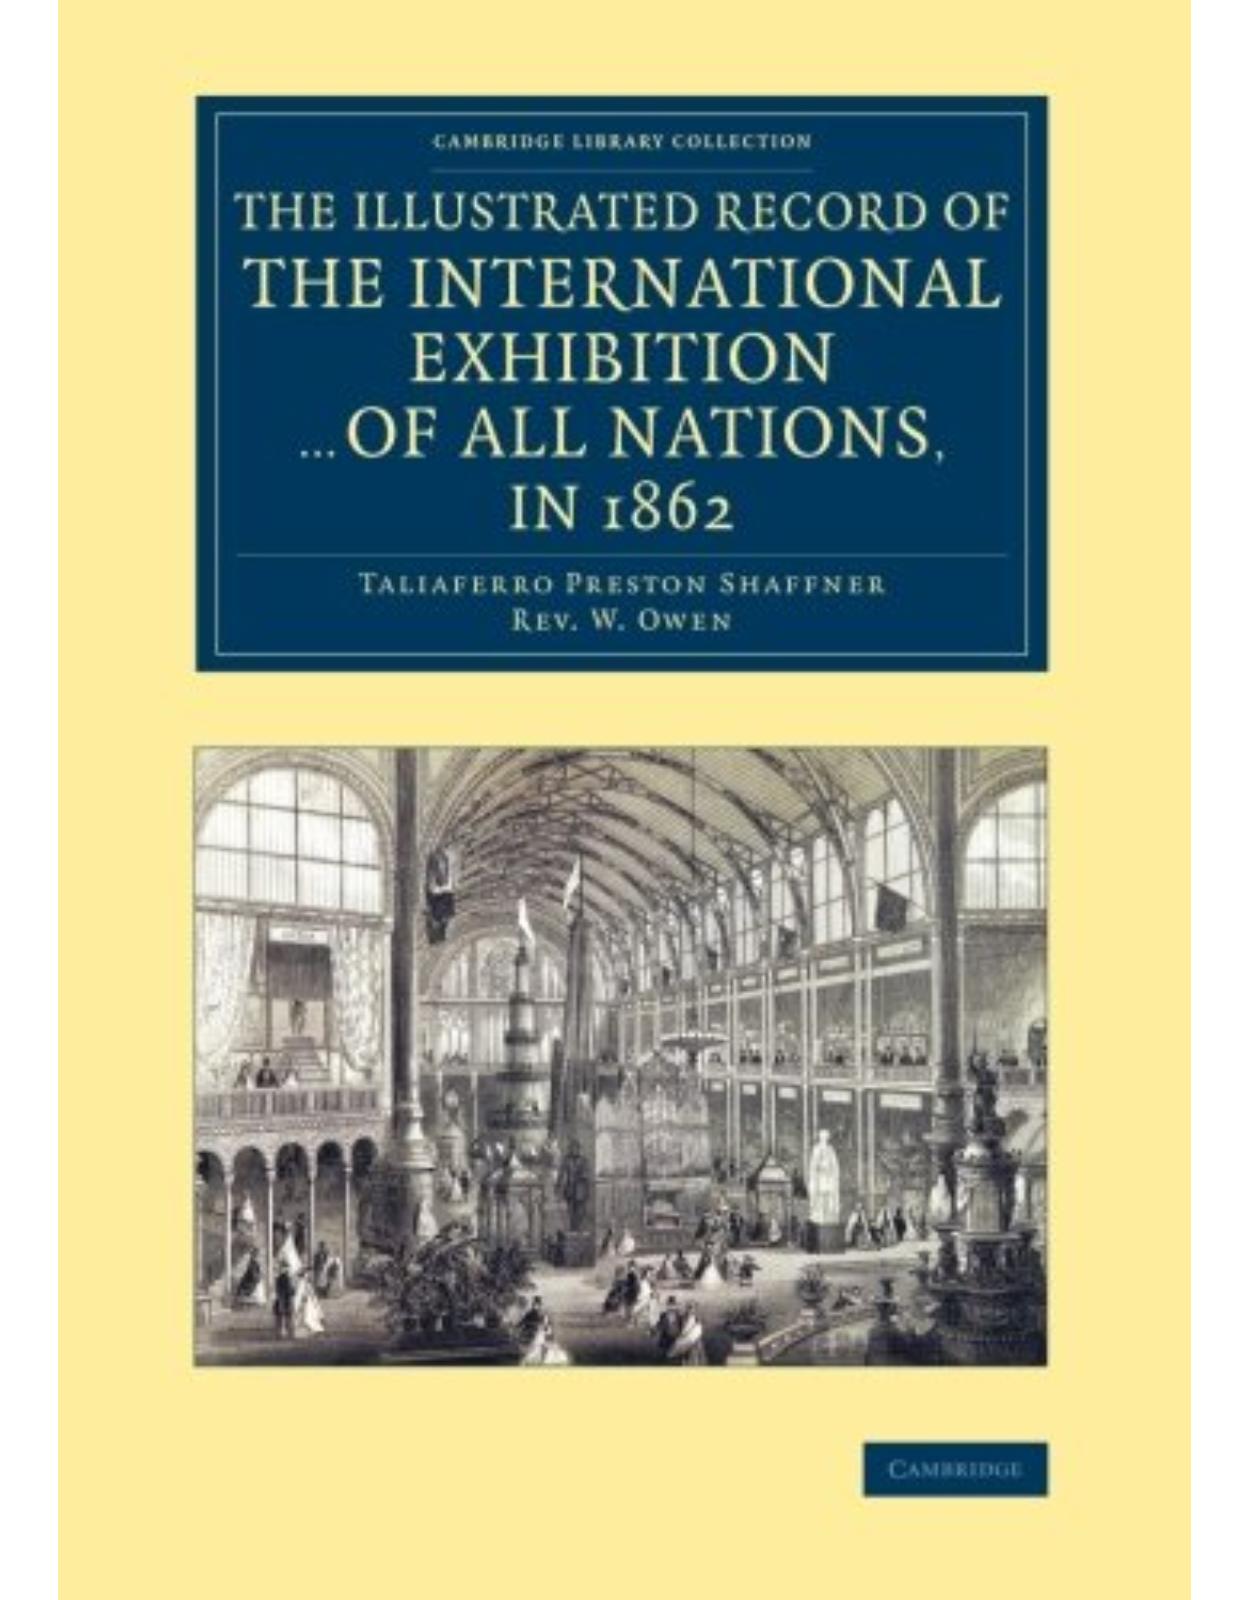 The Illustrated Record of the International Exhibition ... of All Nations, in 1862 (Cambridge Library Collection - British and Irish History, 19th Century)